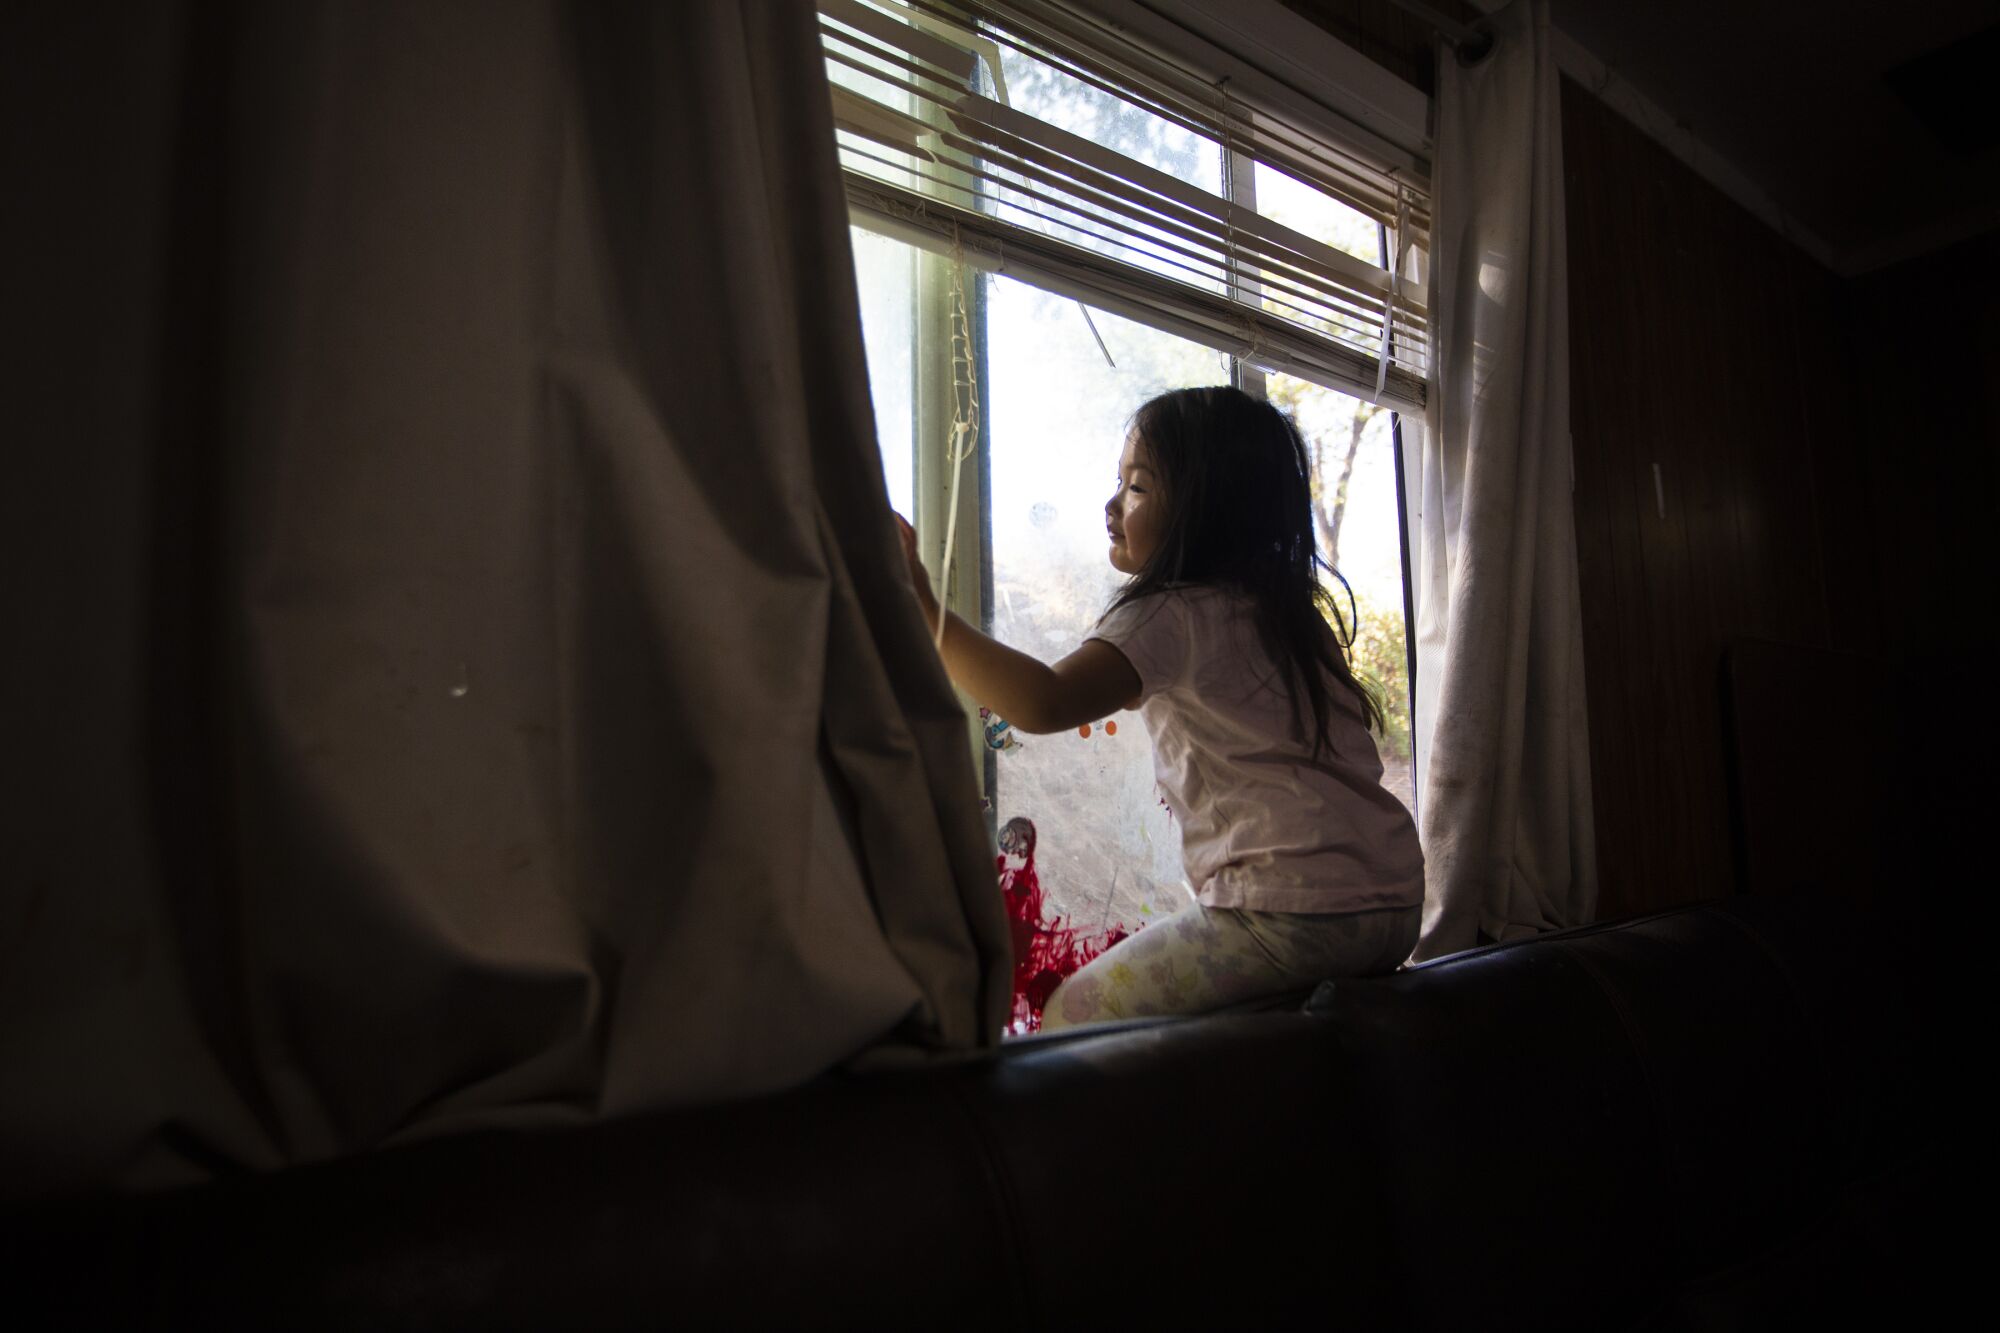 A young girl sits looking out a window 